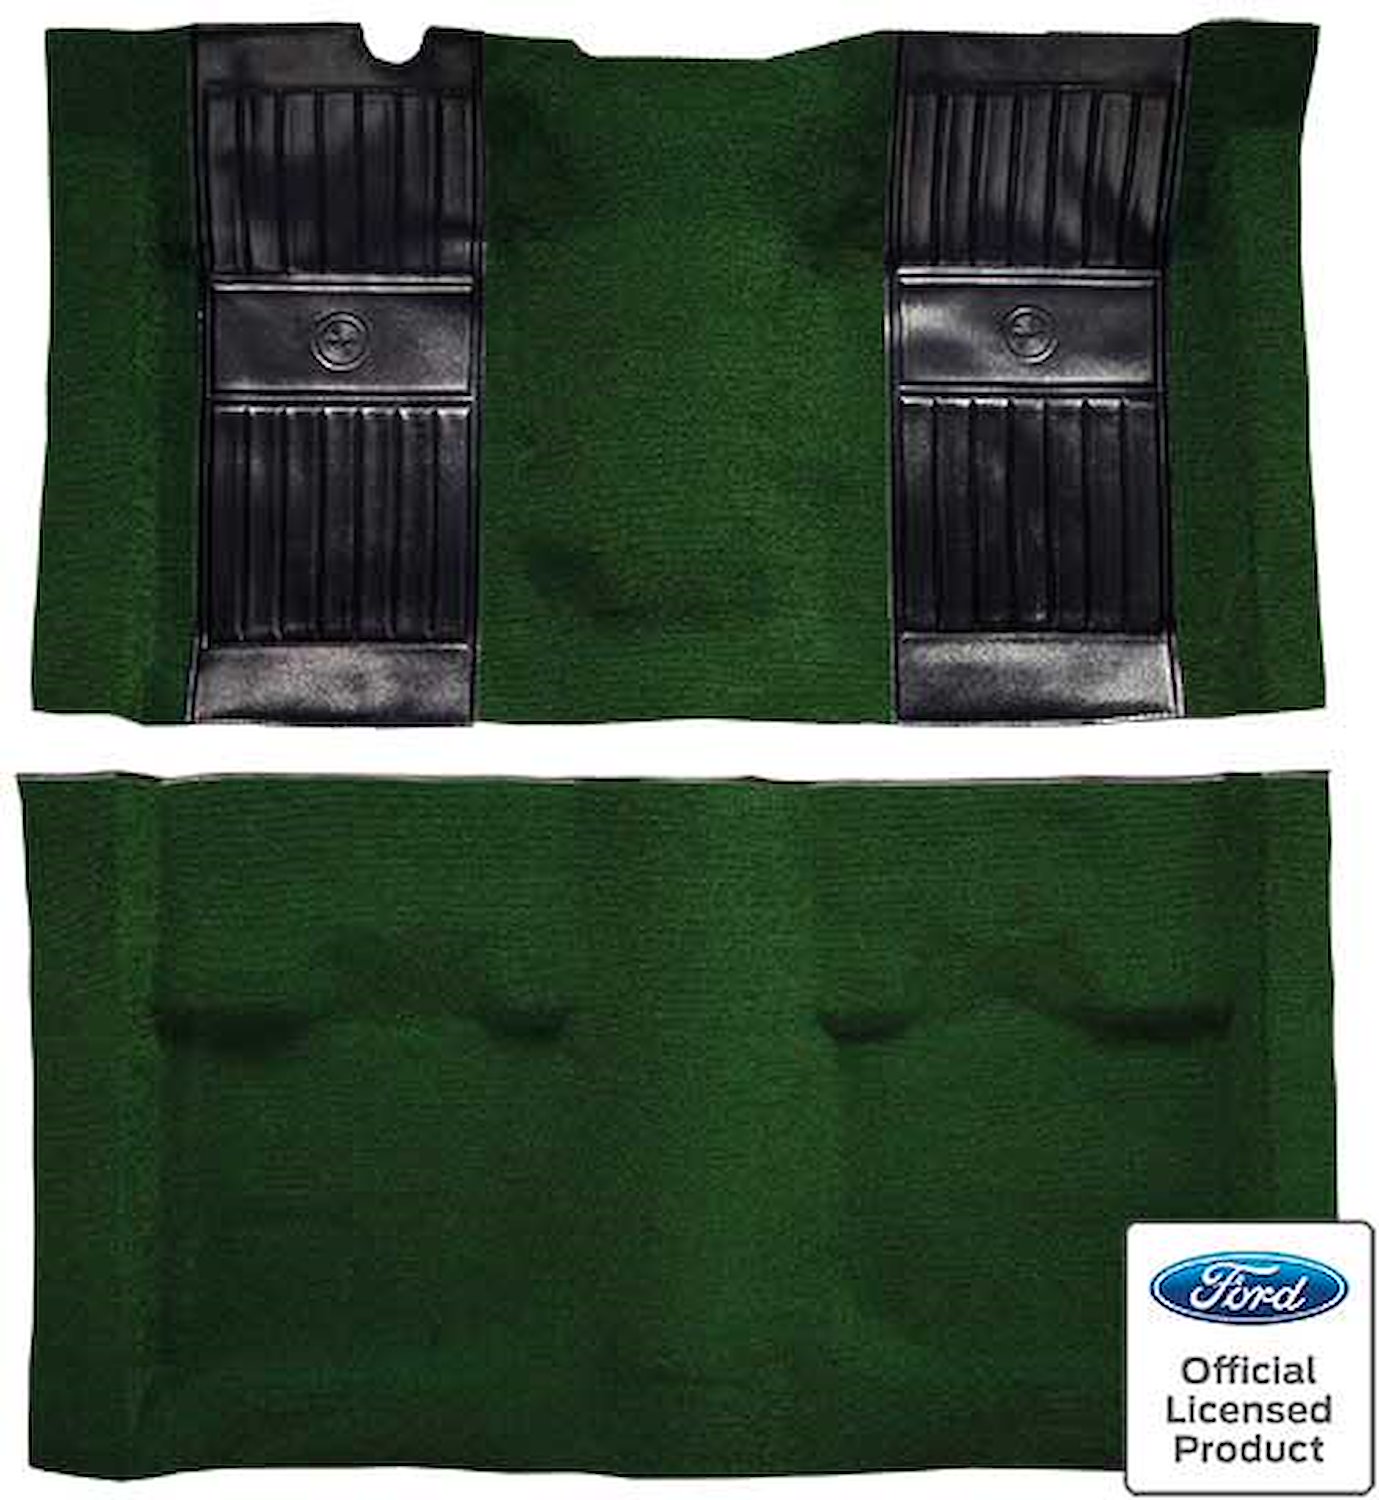 A4115A39 Passenger Area Nylon Loop Floor Carpet 1971-73 Mustang Mach 1; Green With Black Pony Inserts